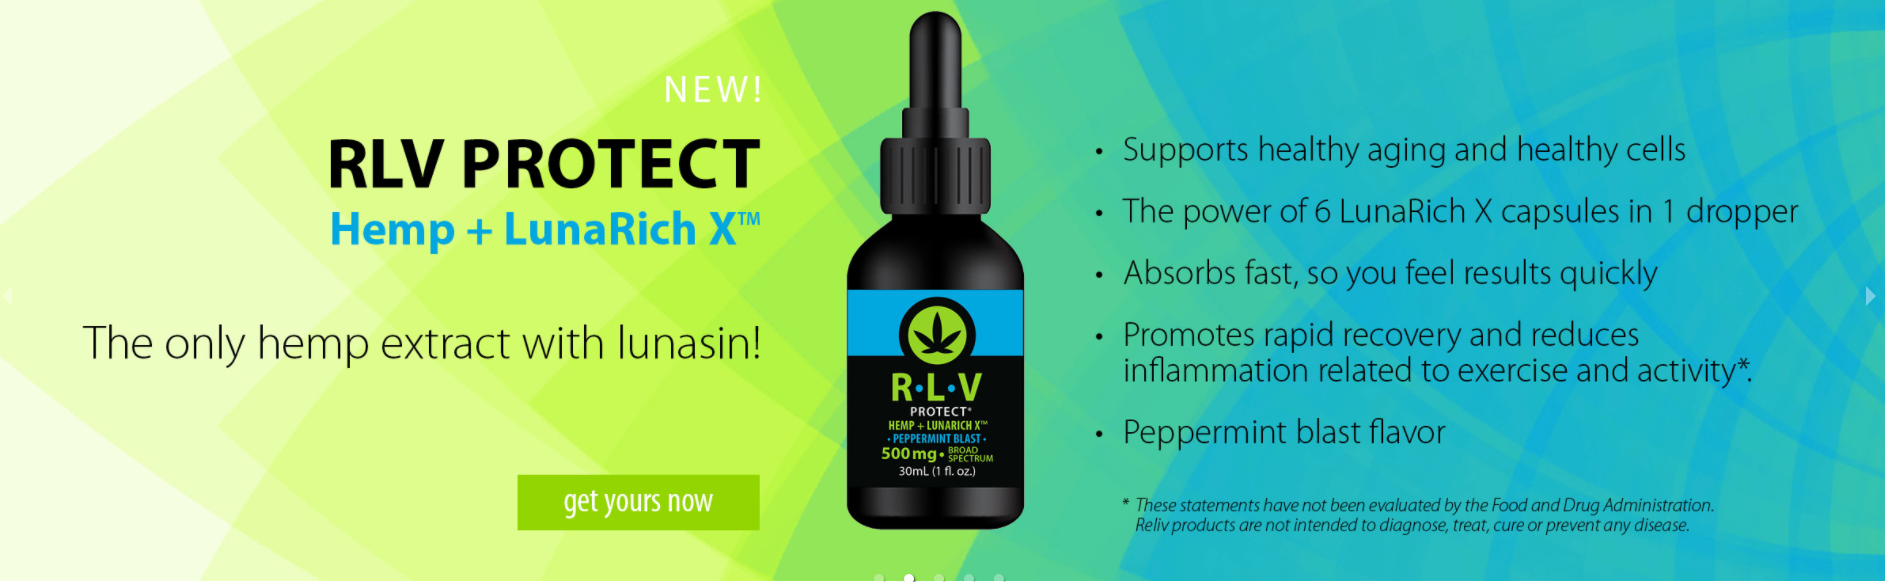 reliv international rlv protect